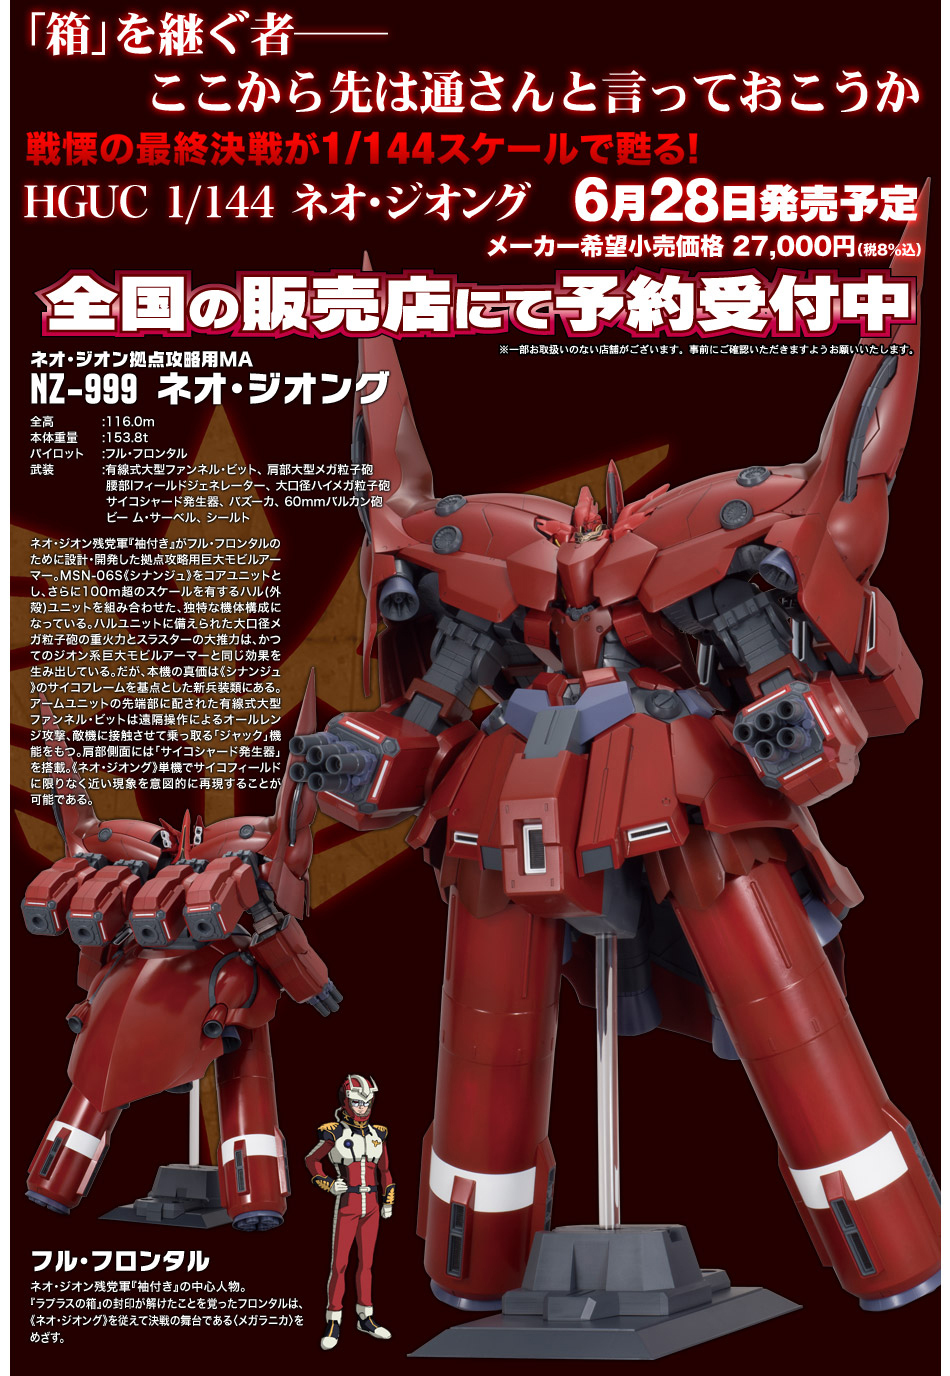 HGUC 1/144 Neo Zeong: Photoreview reloaded. All the Latest Images 